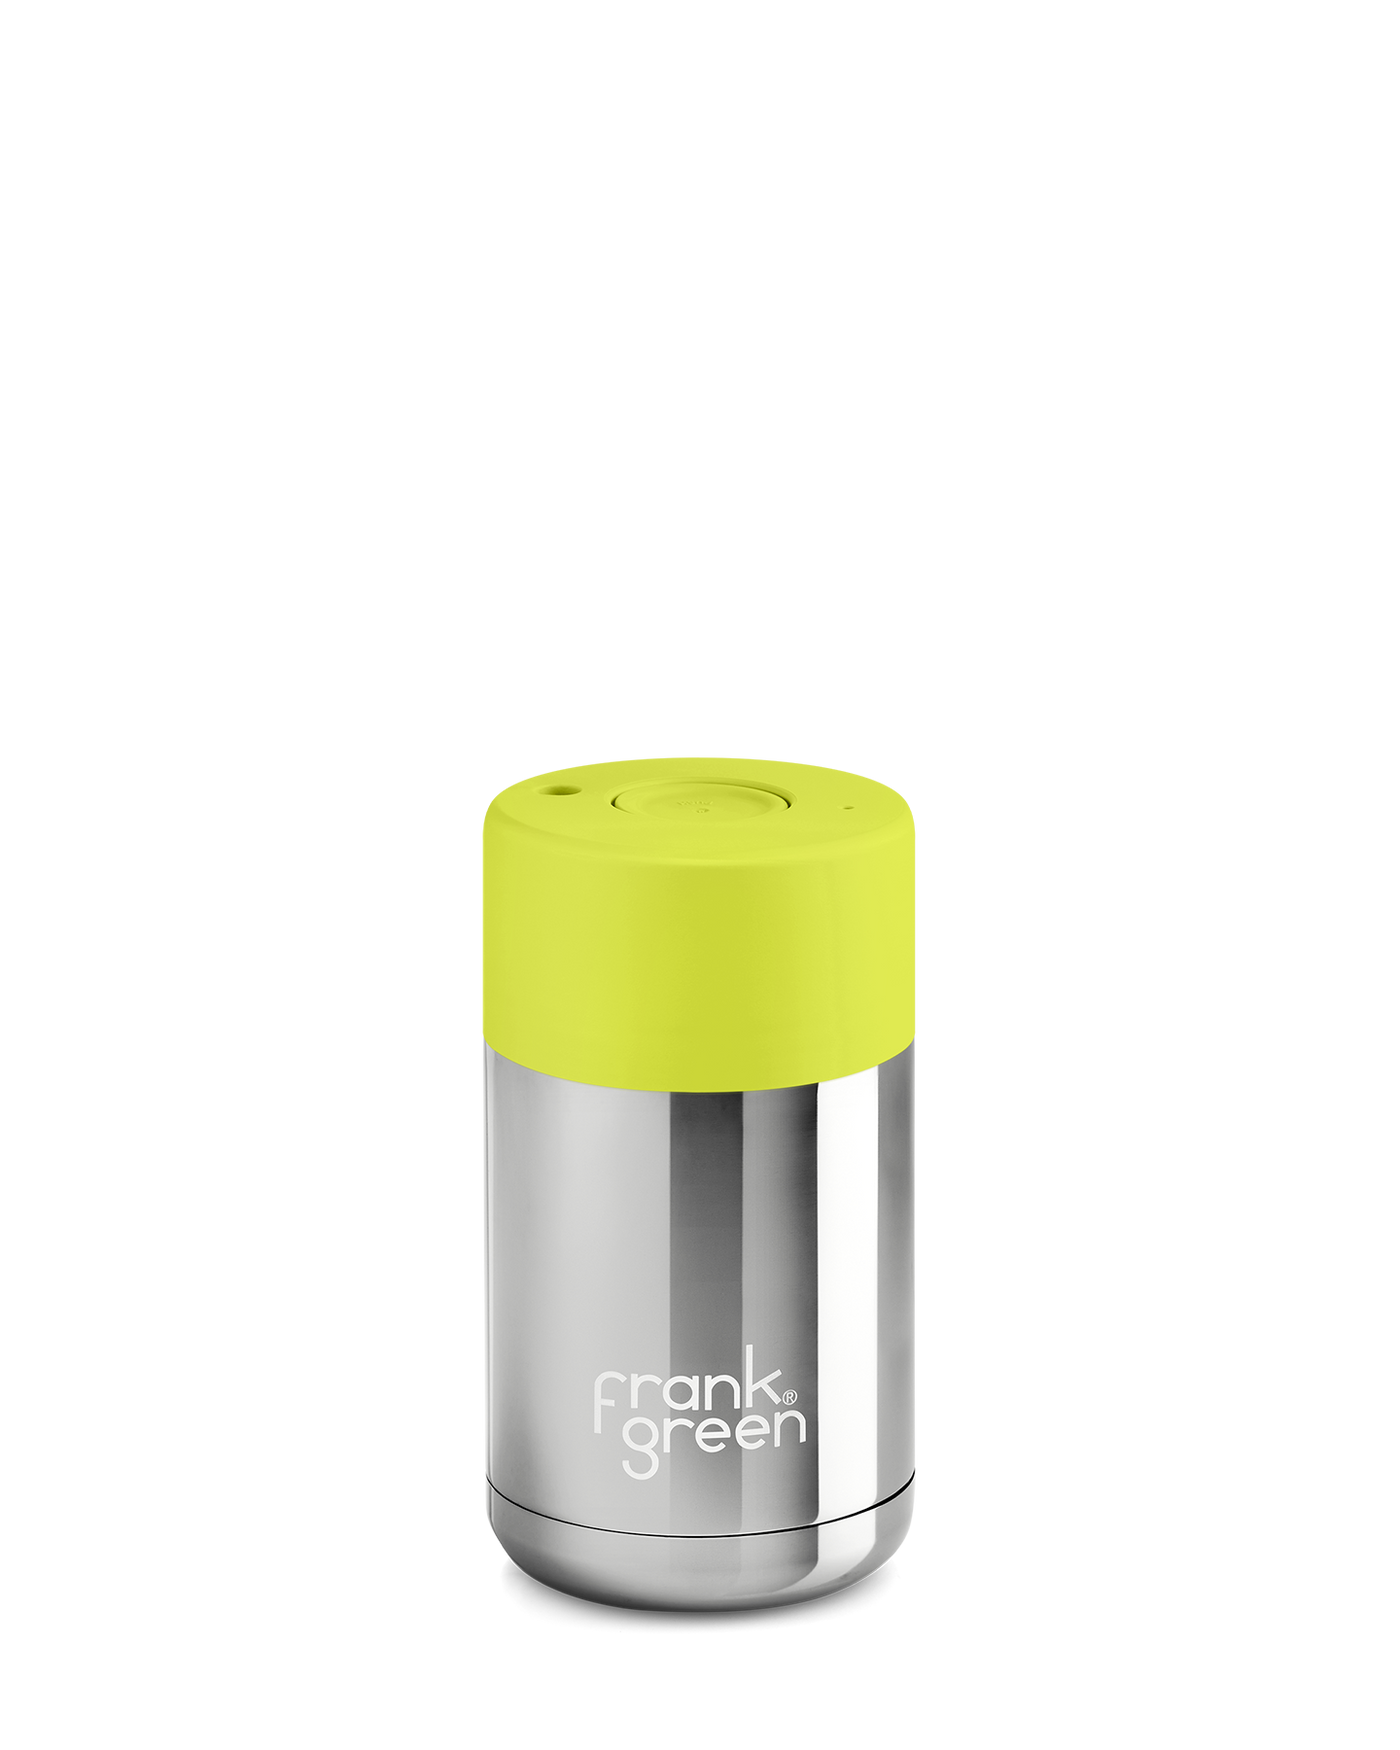 B02S03C08-22-22 10oz Stainless Steel Ceramic Reusable with Push Button Lid | Silver/Neon Yellow